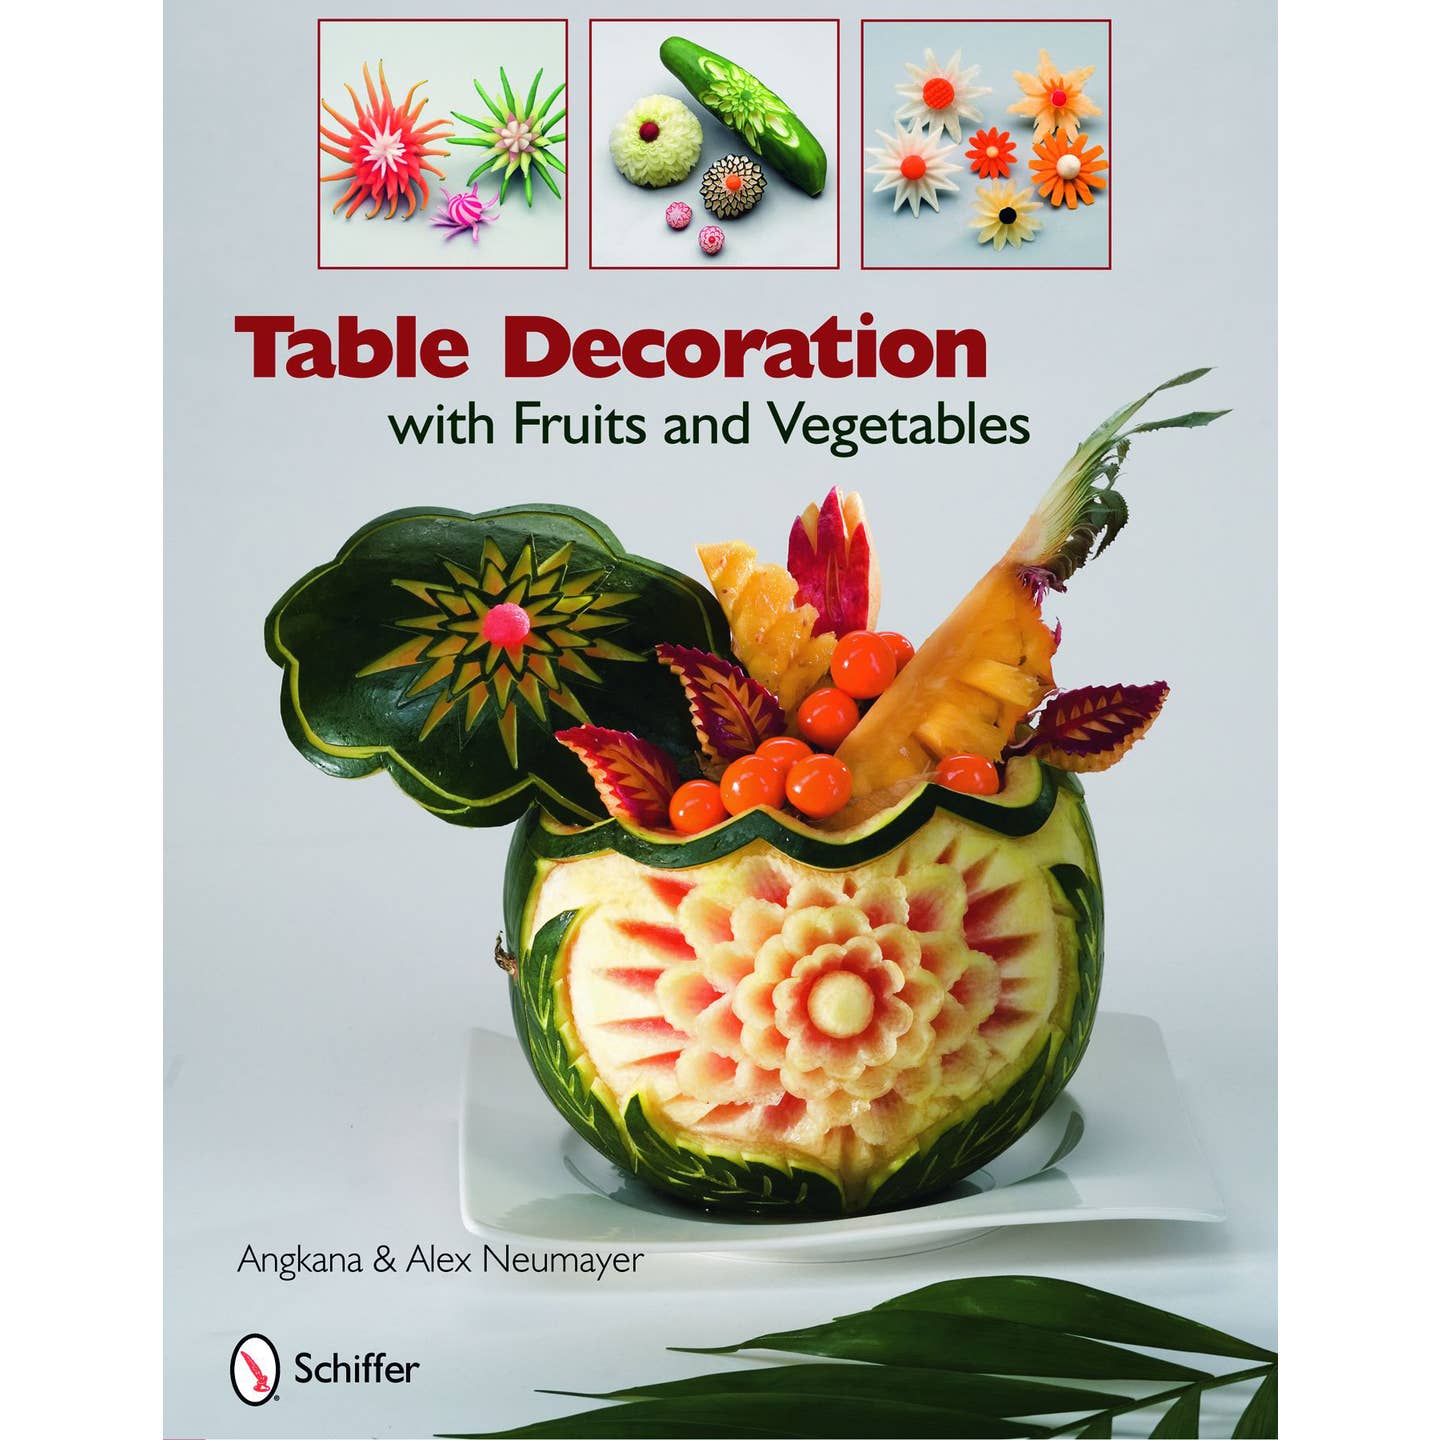 Table Decoration: with Fruits and Vegetables